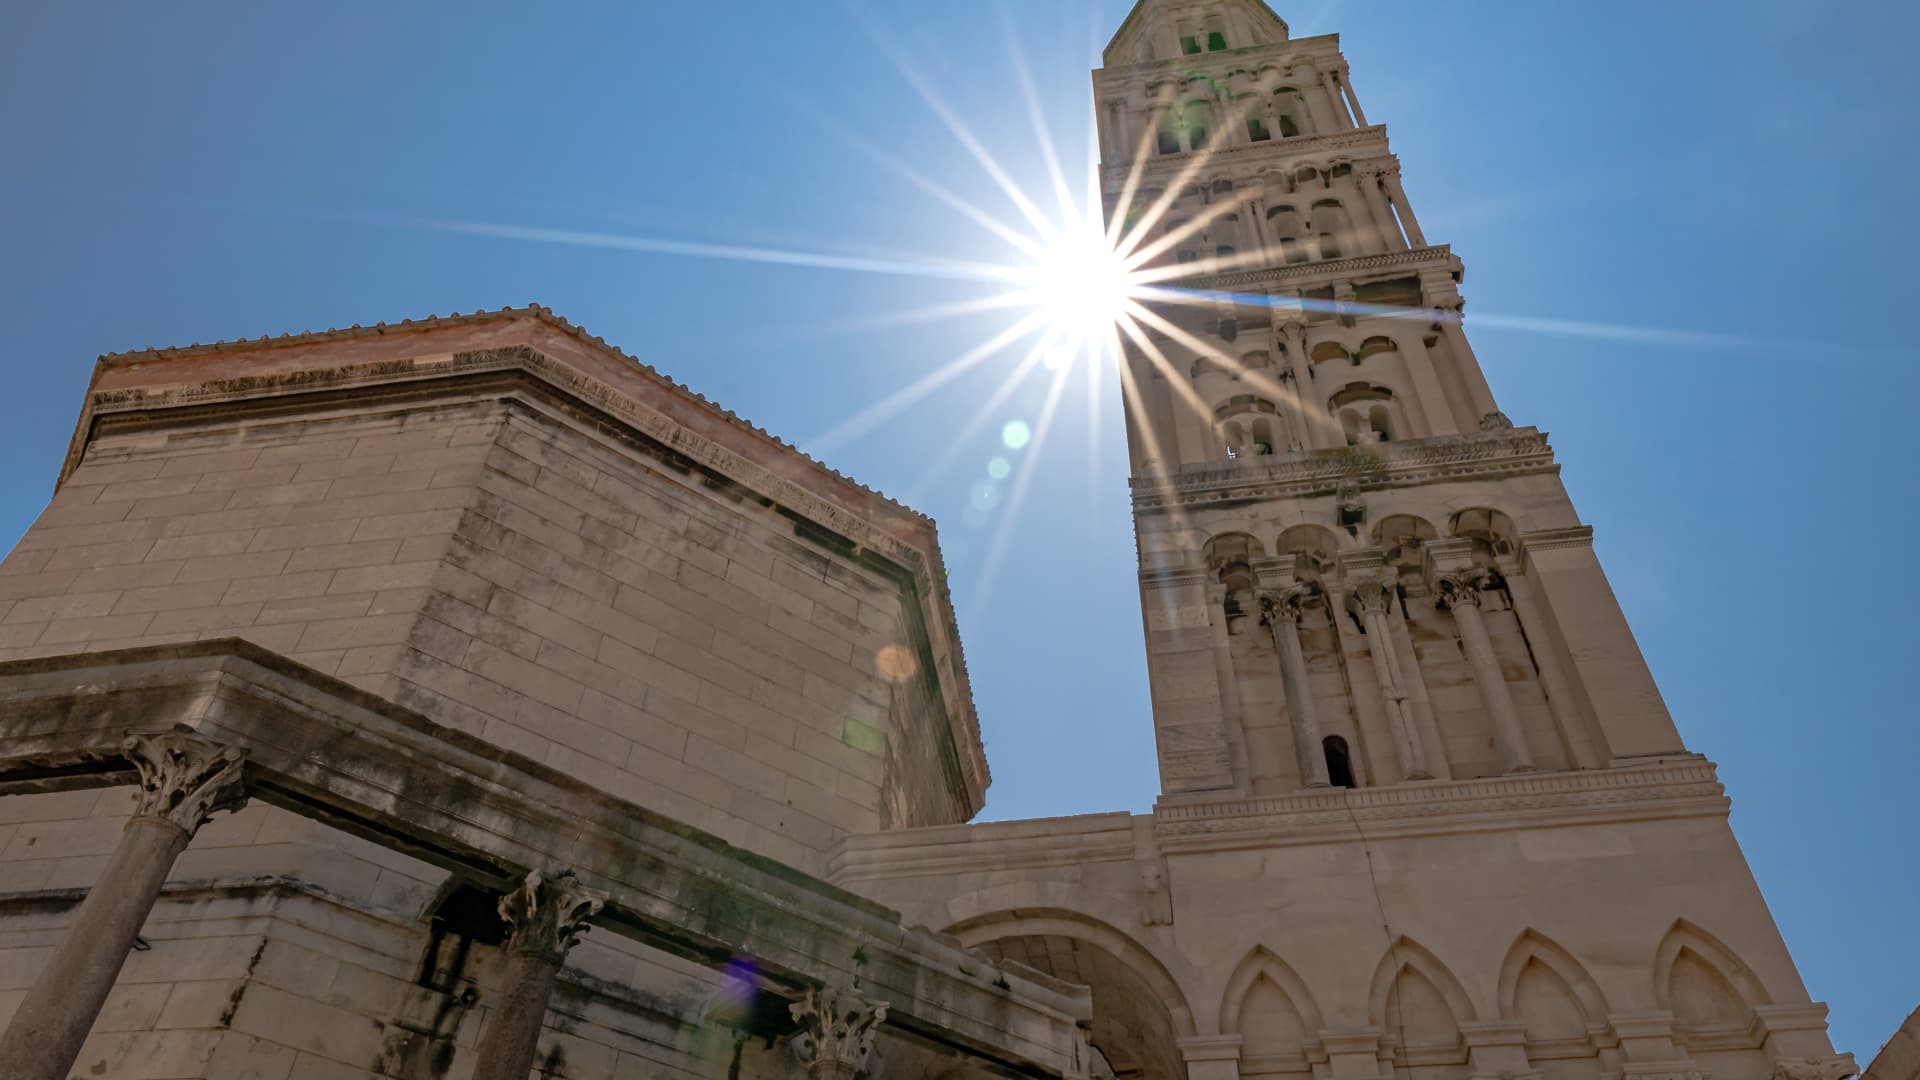 One of Split's most iconic attractions is the Cathedral of St. Domnius — filled with murals, carved altars and a steep bell tower.